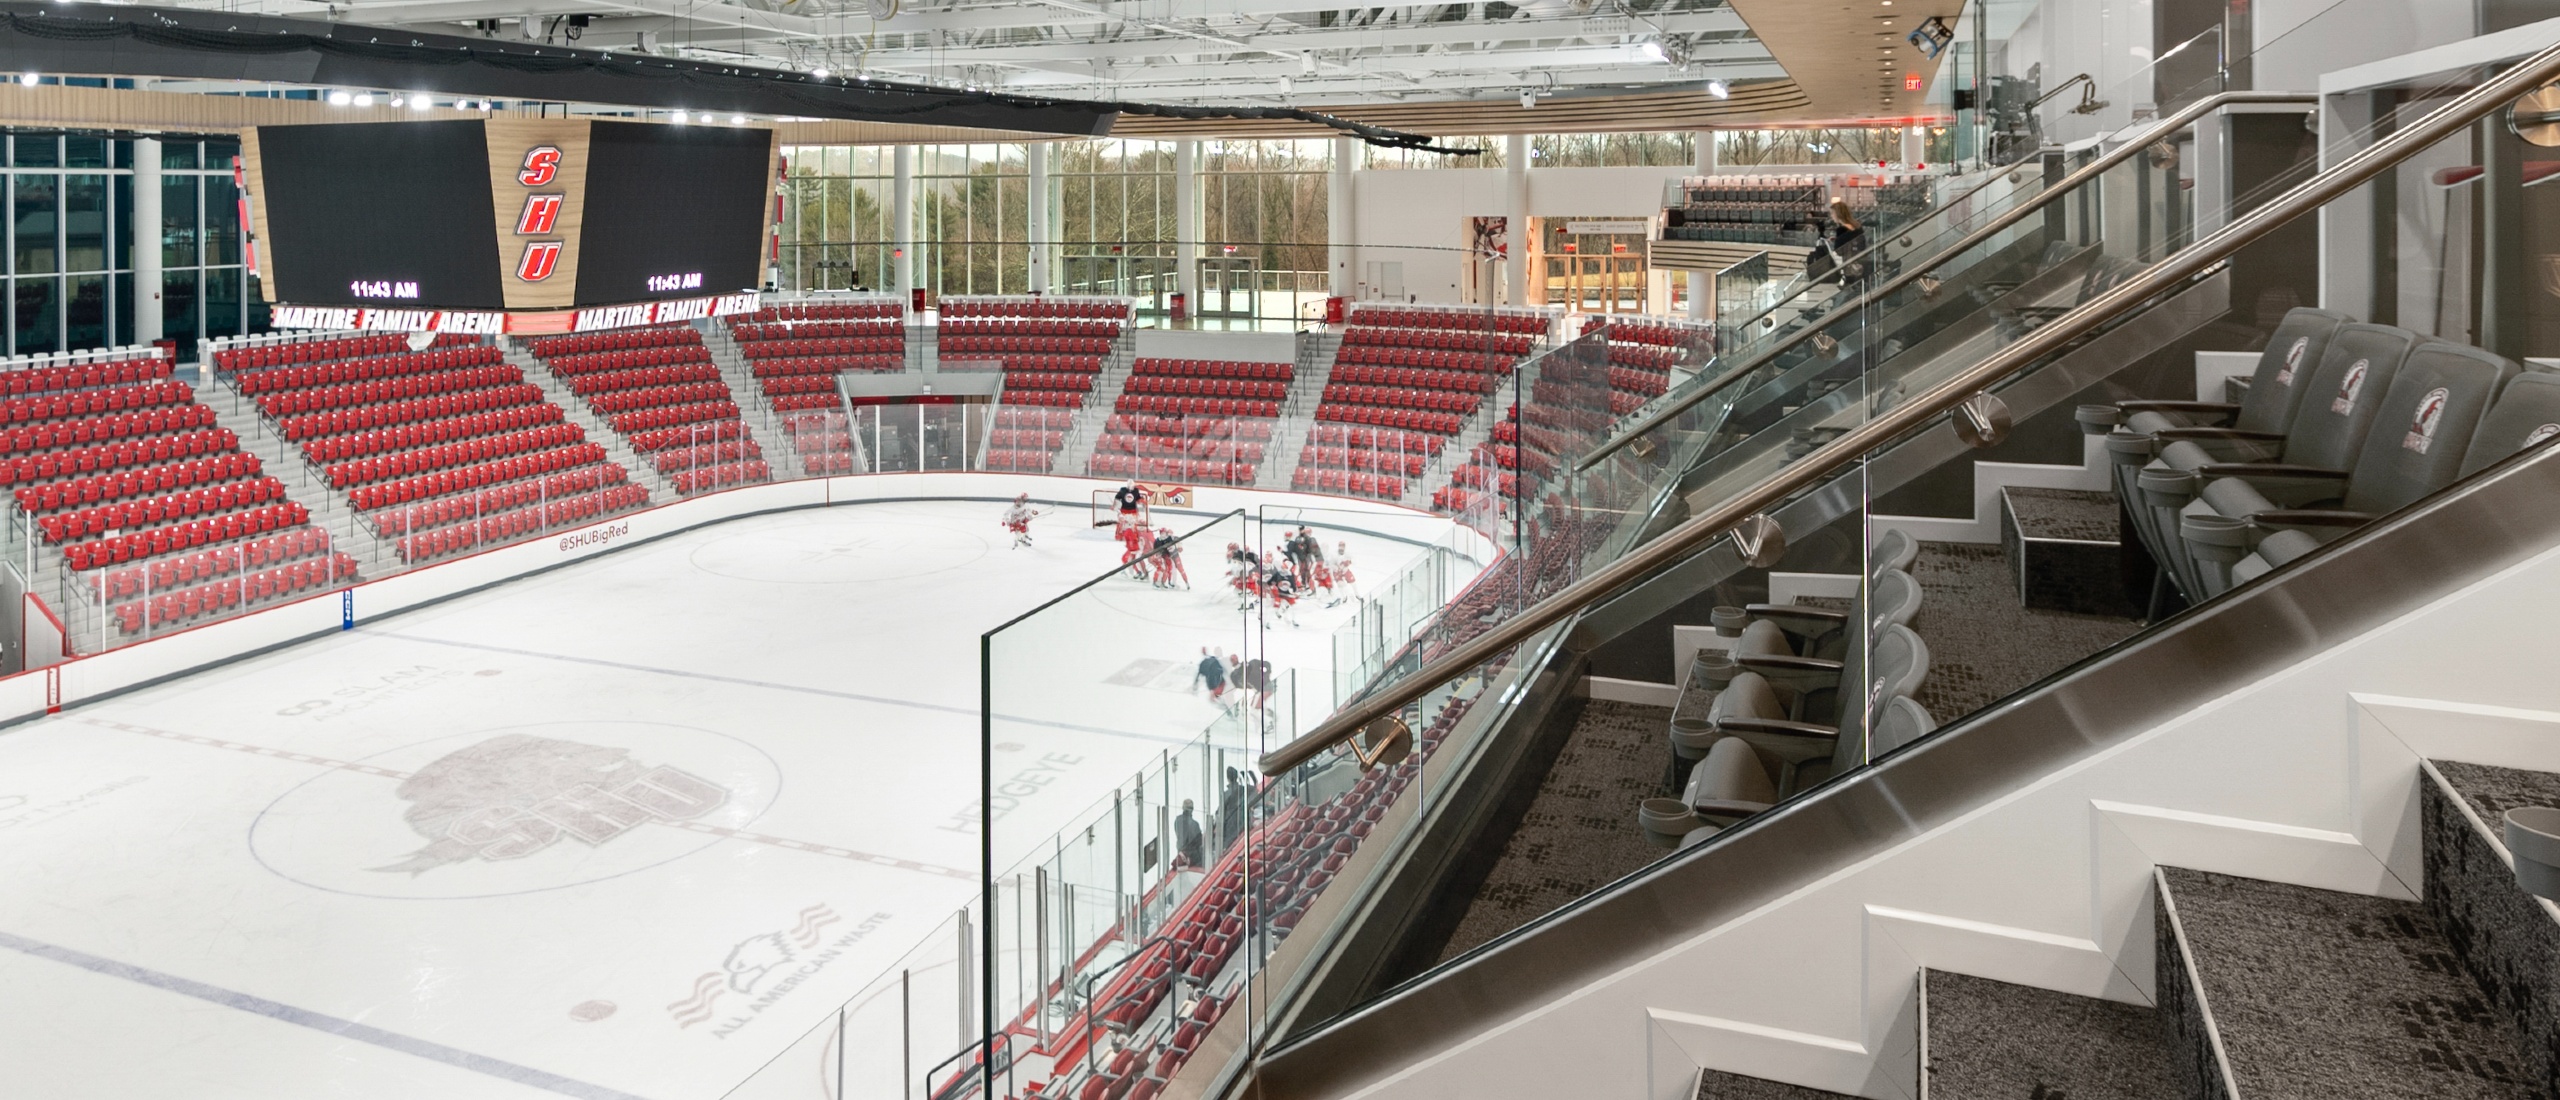 Optik™ Shoe selected for The Martire Family Arena